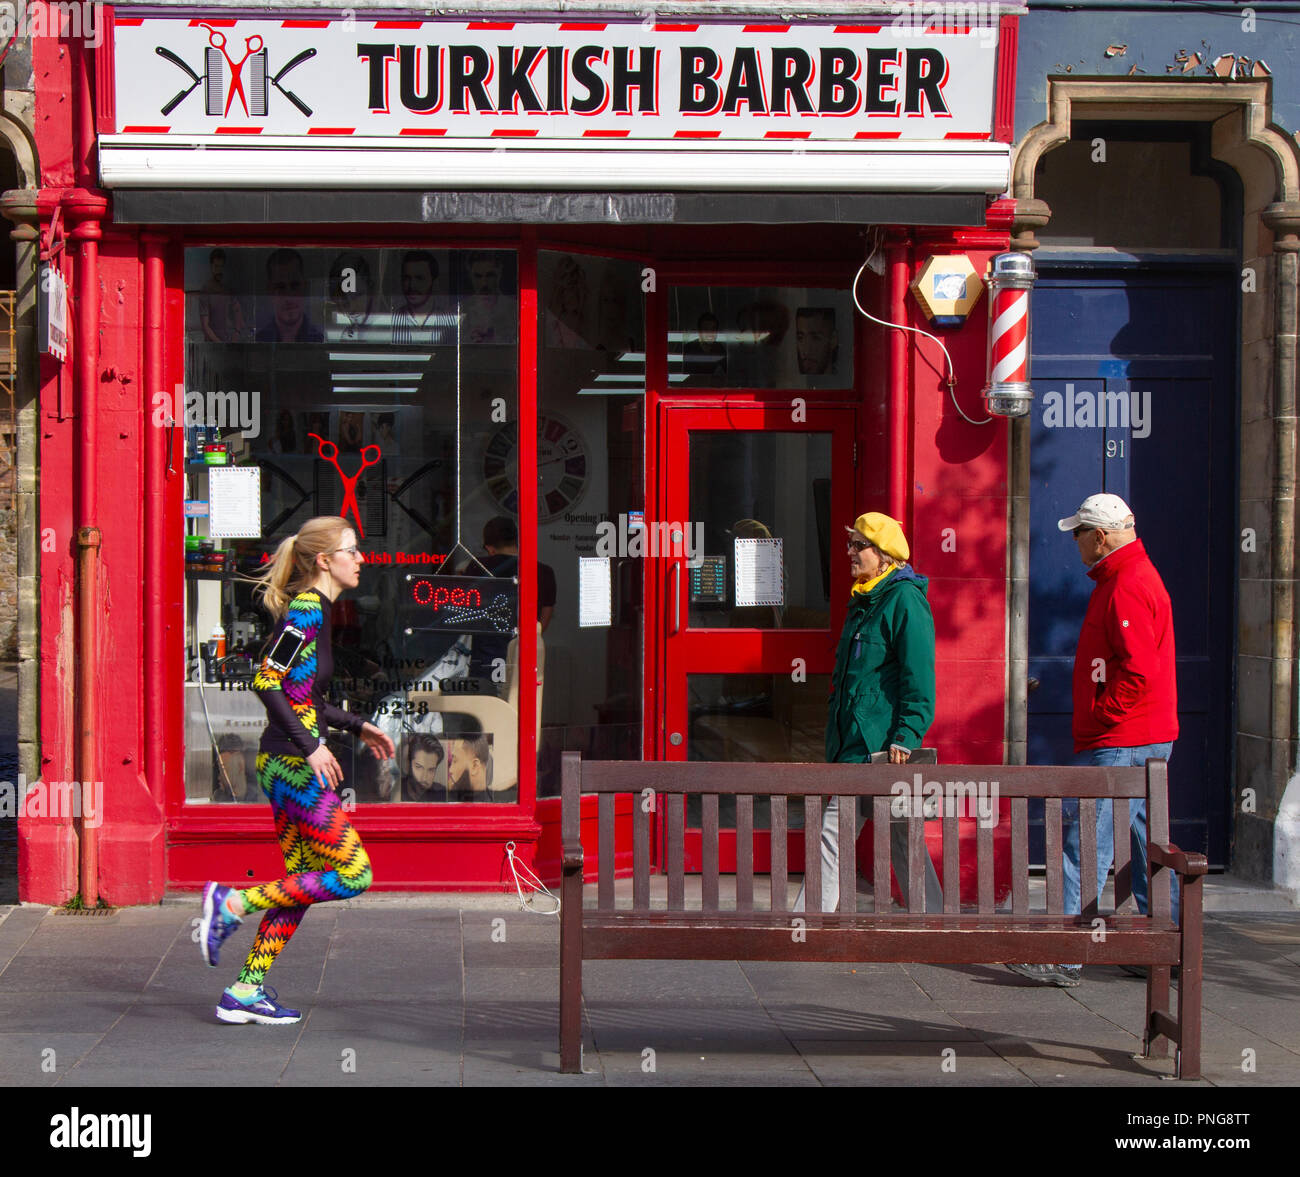 How Turkish barbers took over the British high street